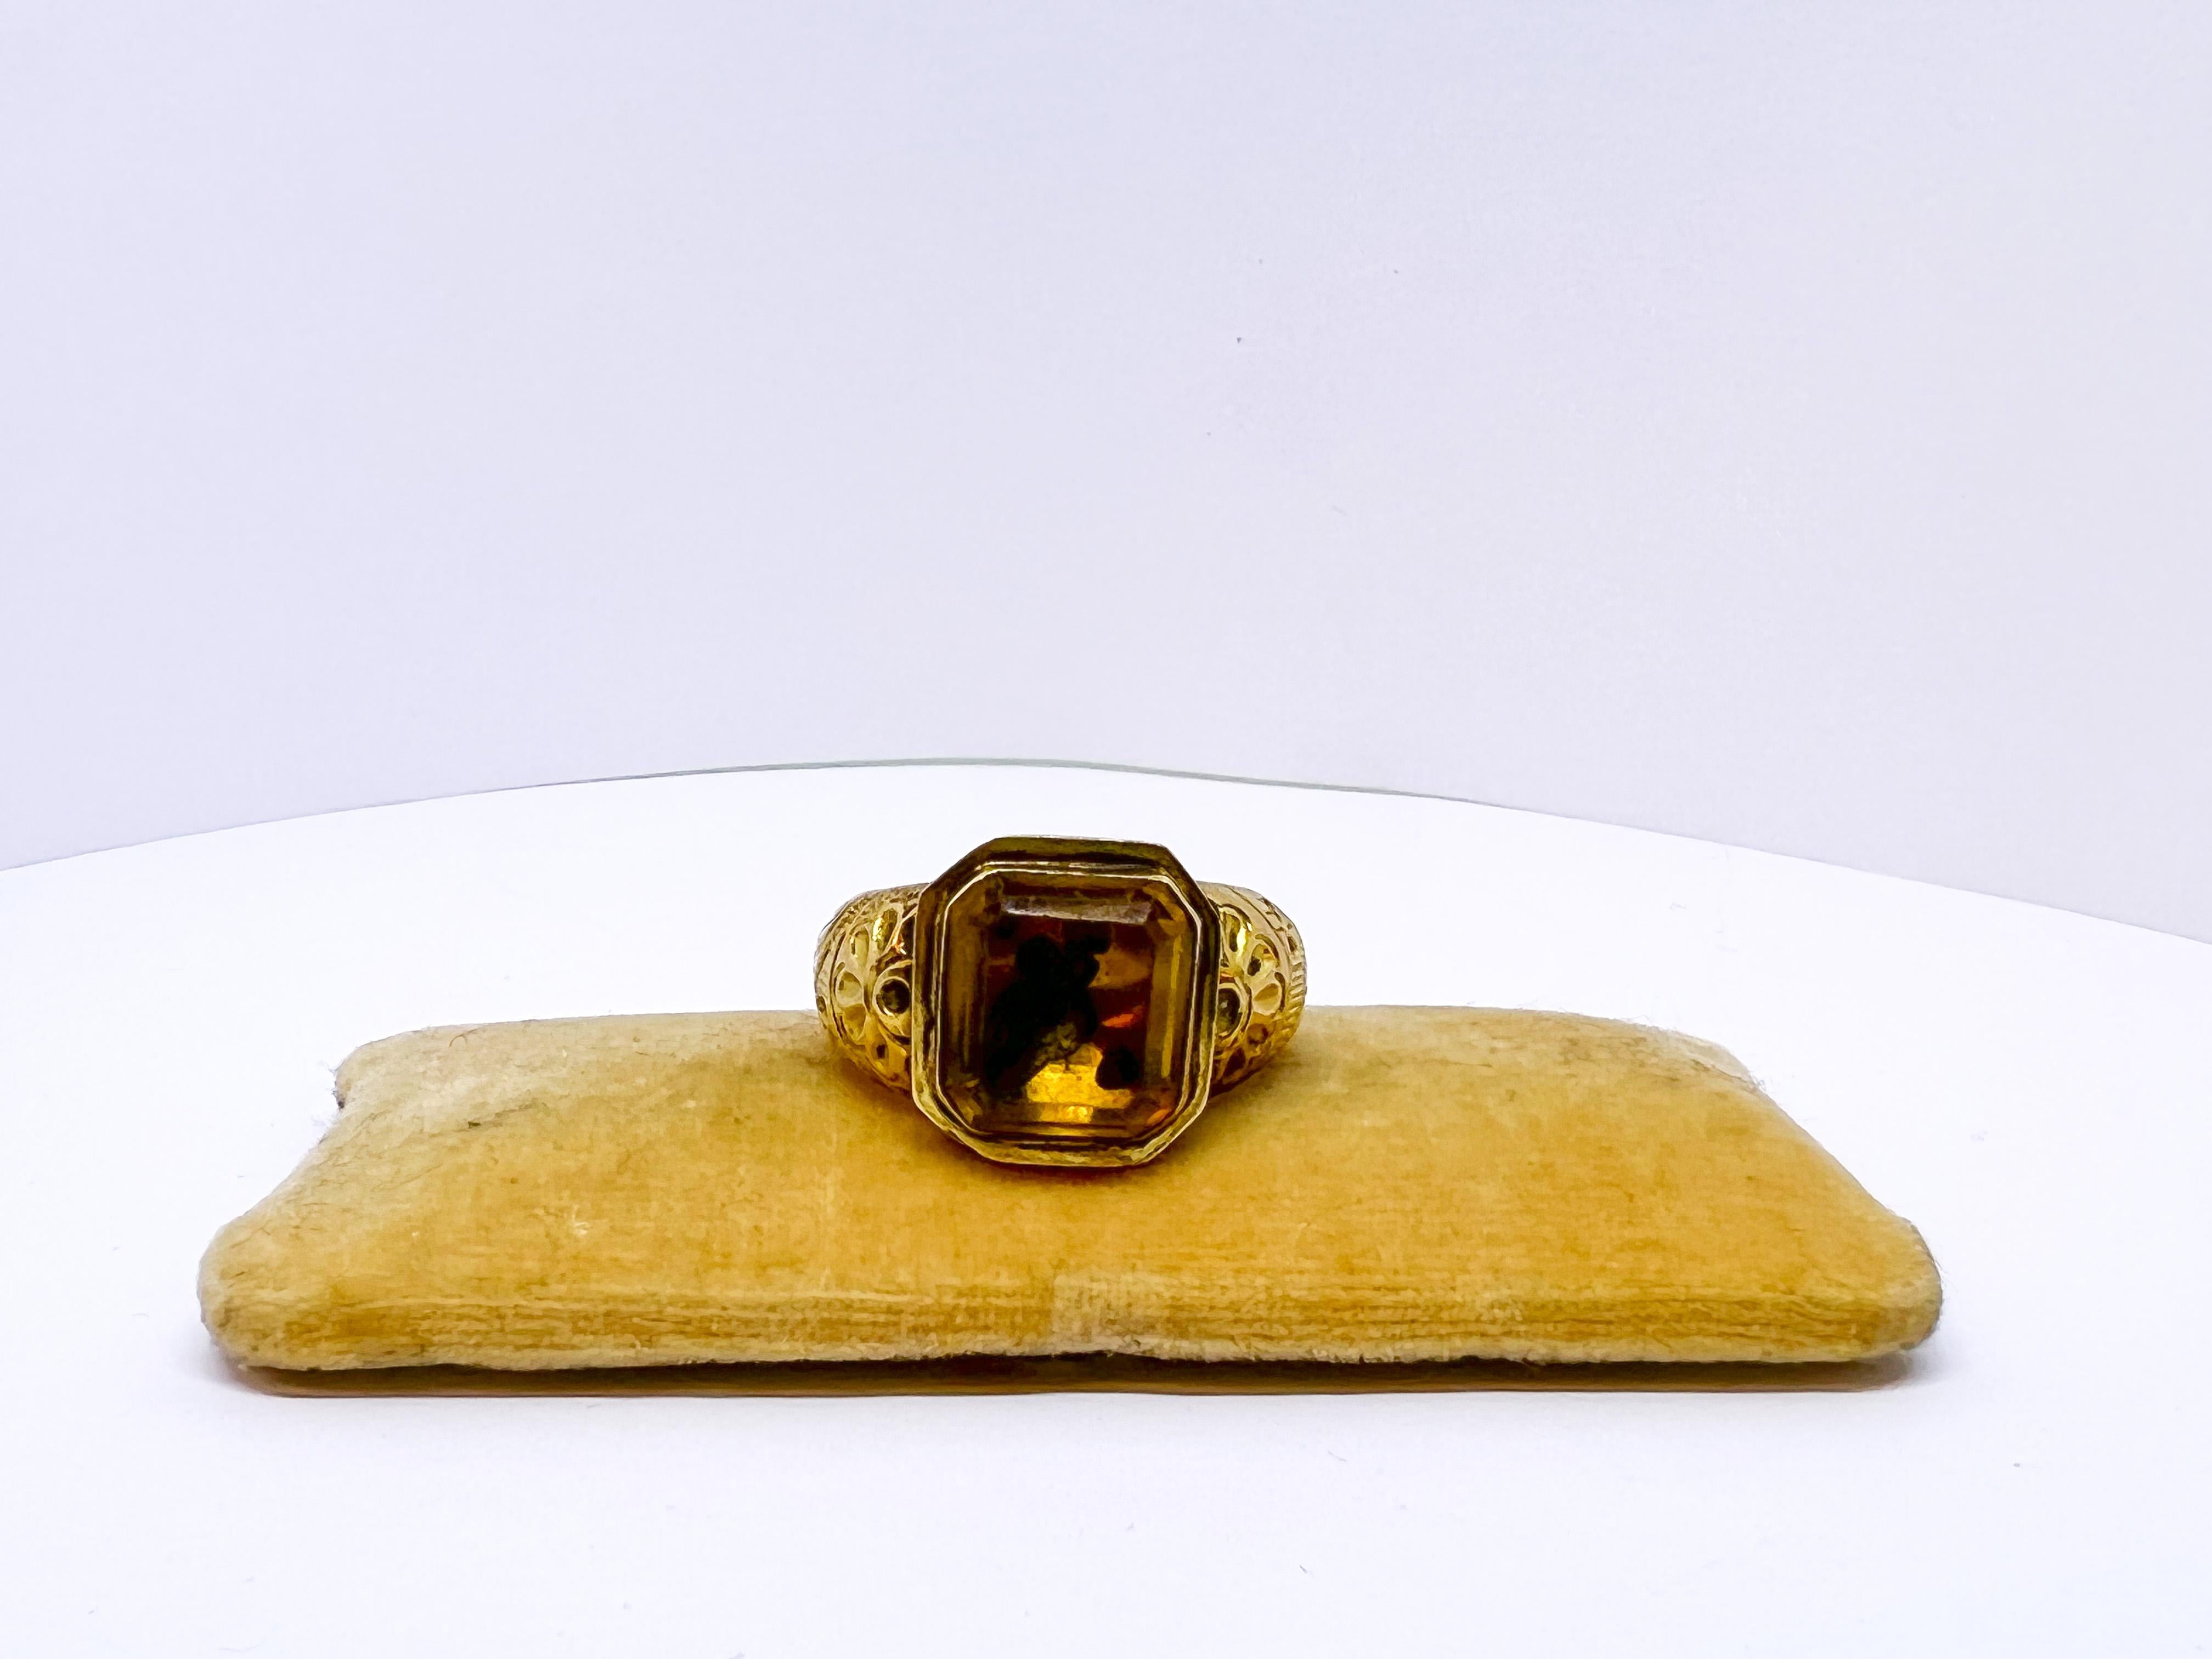 Antique Gold Ring 1855-1877 Tampere Finland.

Very rare indeed.
Stone most obviously Glass.
A great ring.
Author Wallin B.E Worked in Tampere in 1855-1877.
About 21mm in diameter